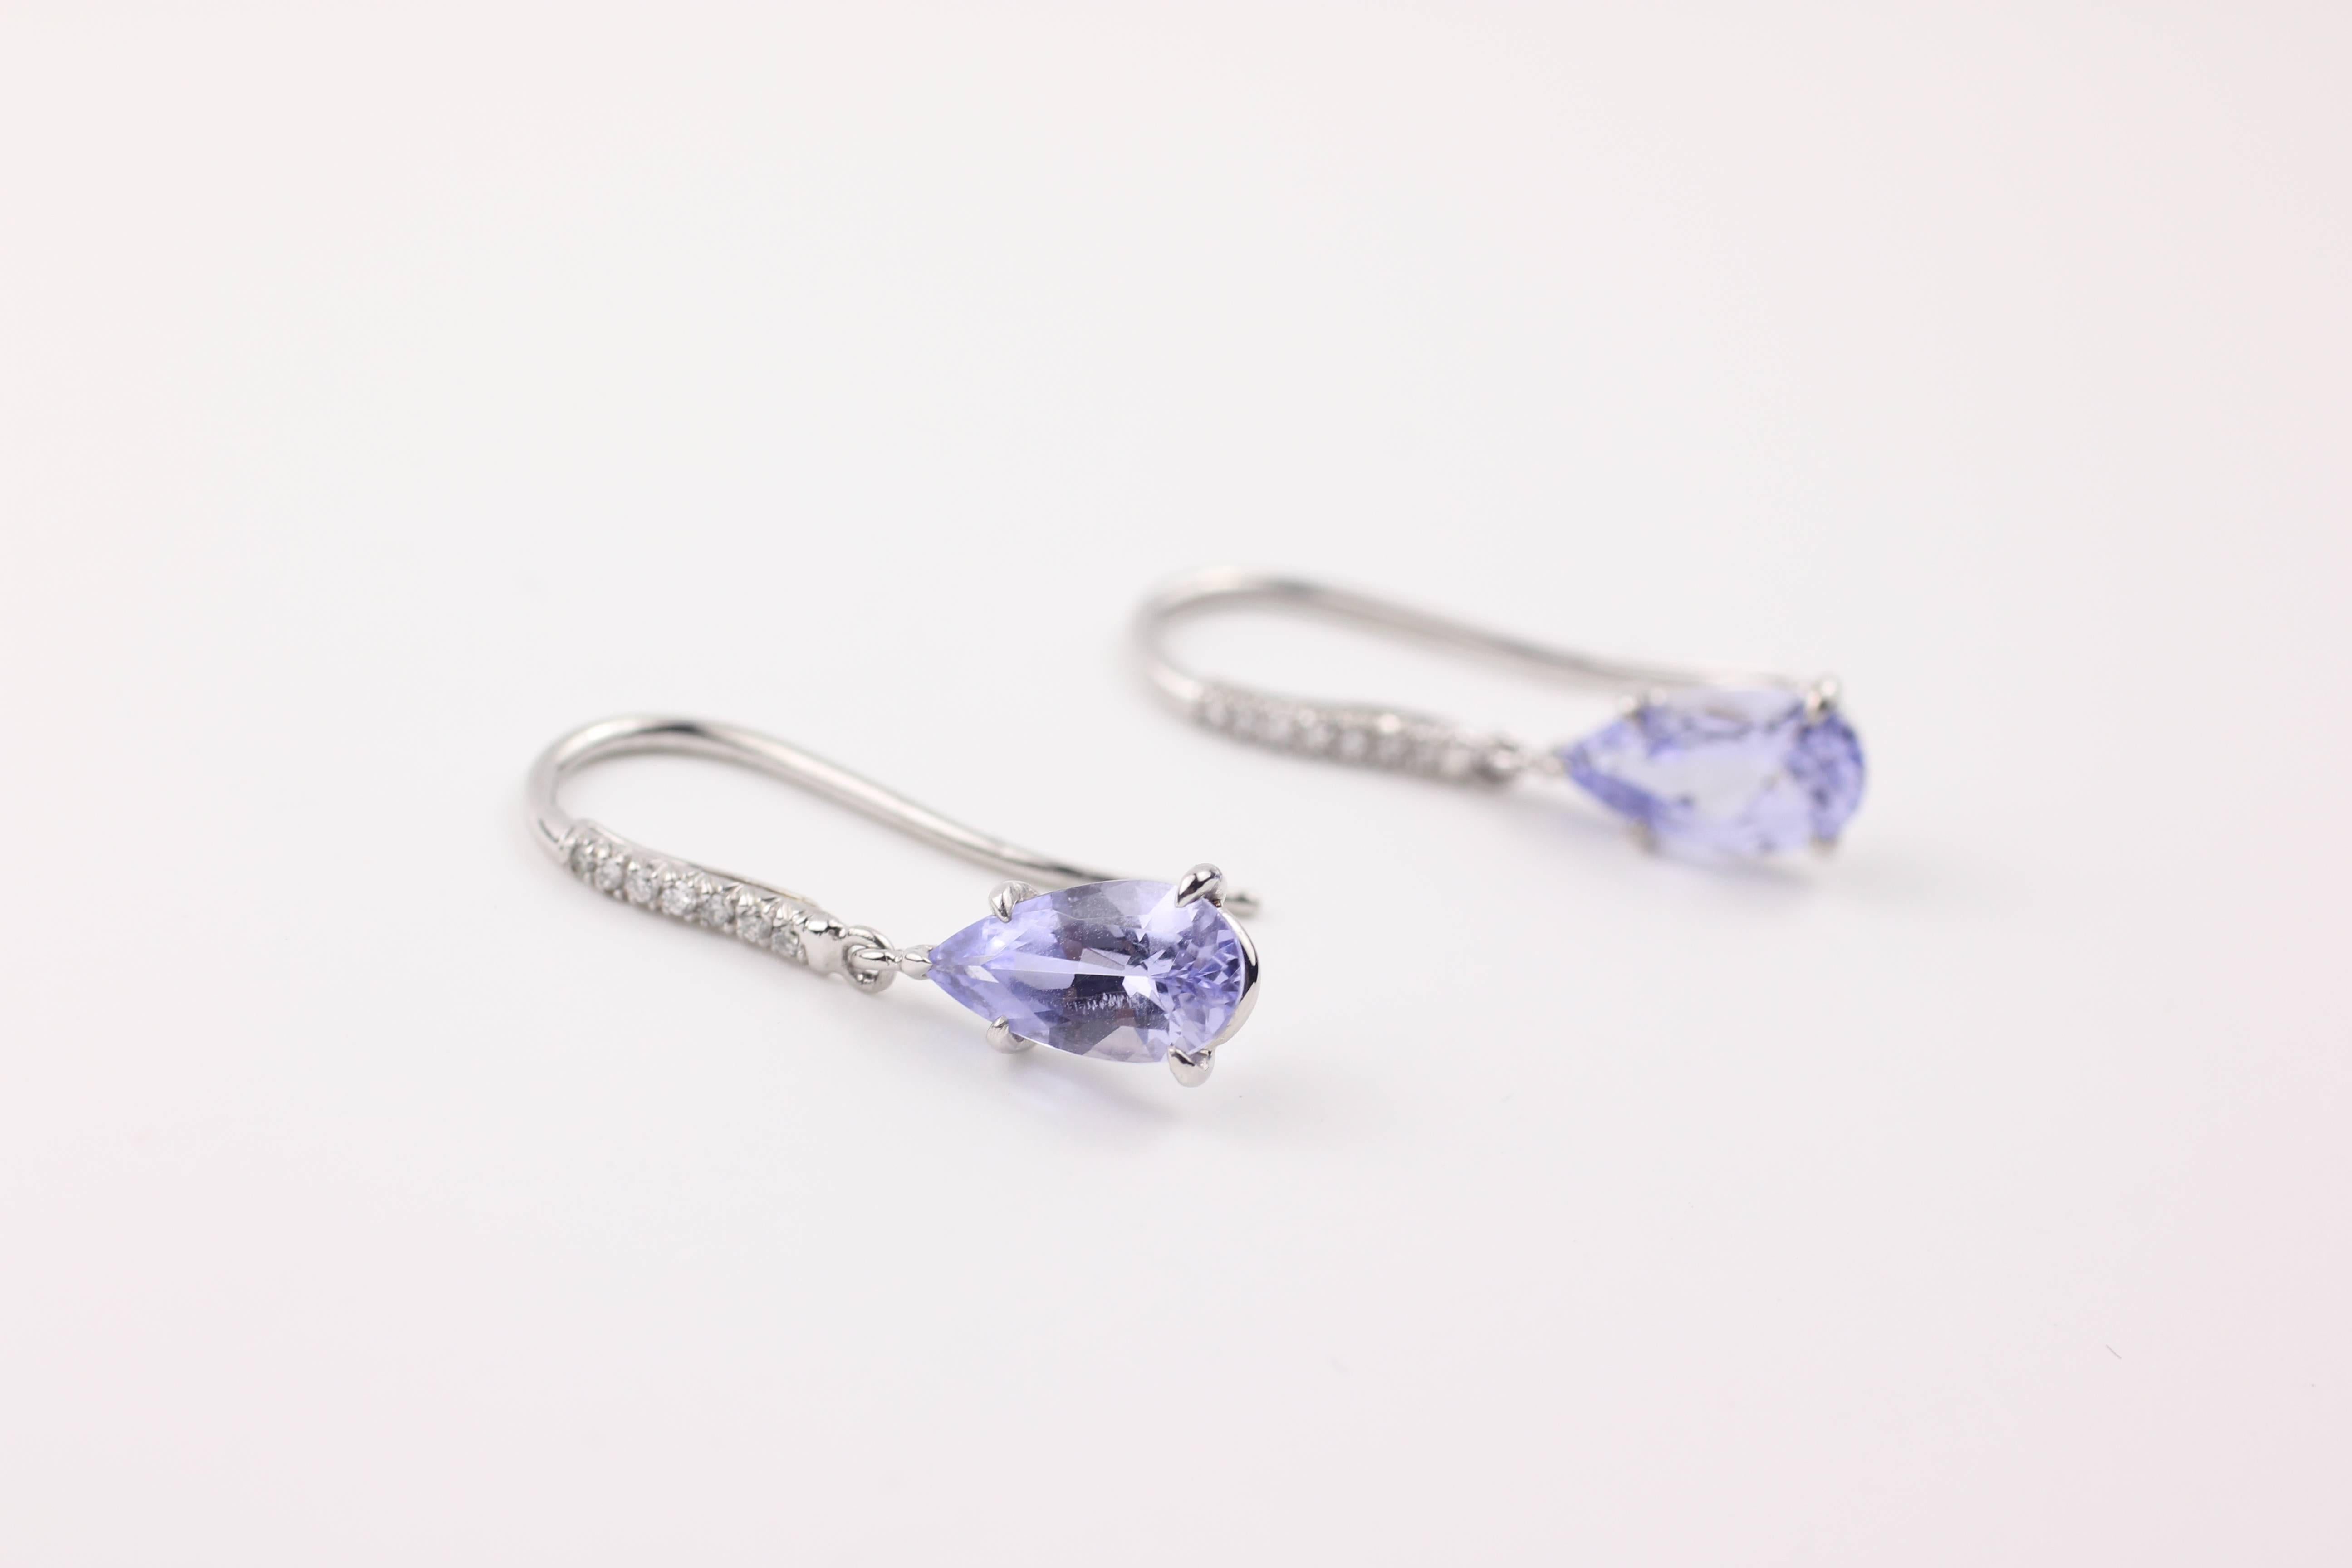 The lavender spinels on these earrings are beautiful and rare.  The two pear-shaped spinels have a combined carat weight of 1.84 cts. and are in 18Kt white gold drop settings.  The earring tops are made of platinum and set with 14 brilliant cut